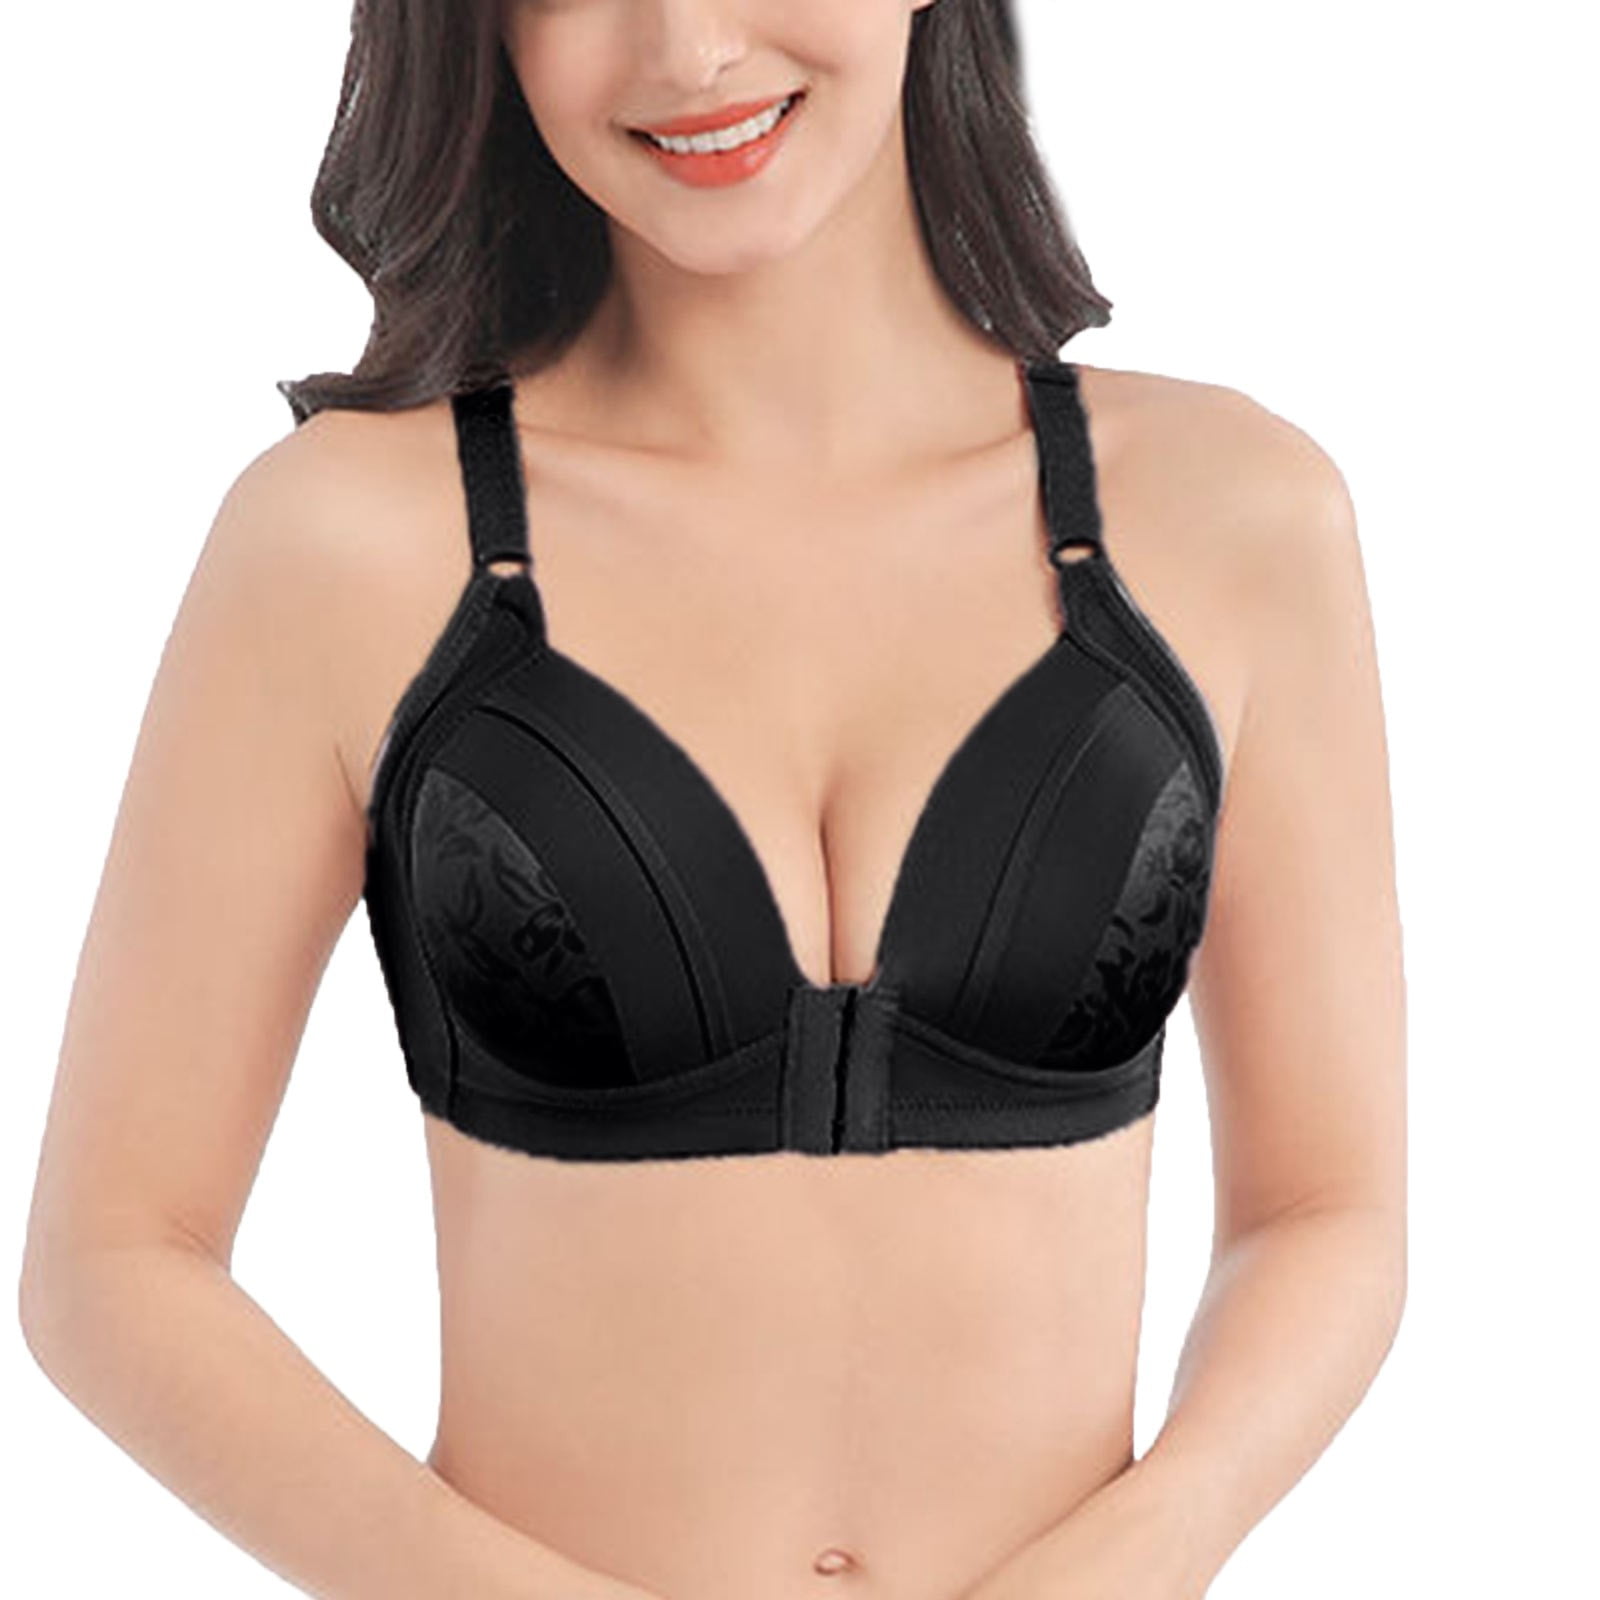 Borniu Wirefree Bras for Women, Plus Size Front Closure Lace Bra Wirefreee  Extra-Elastic Bra Adjustable Shoulder Straps Sports Bras 36B/C-42B/C,  Summer Savings Clearance 